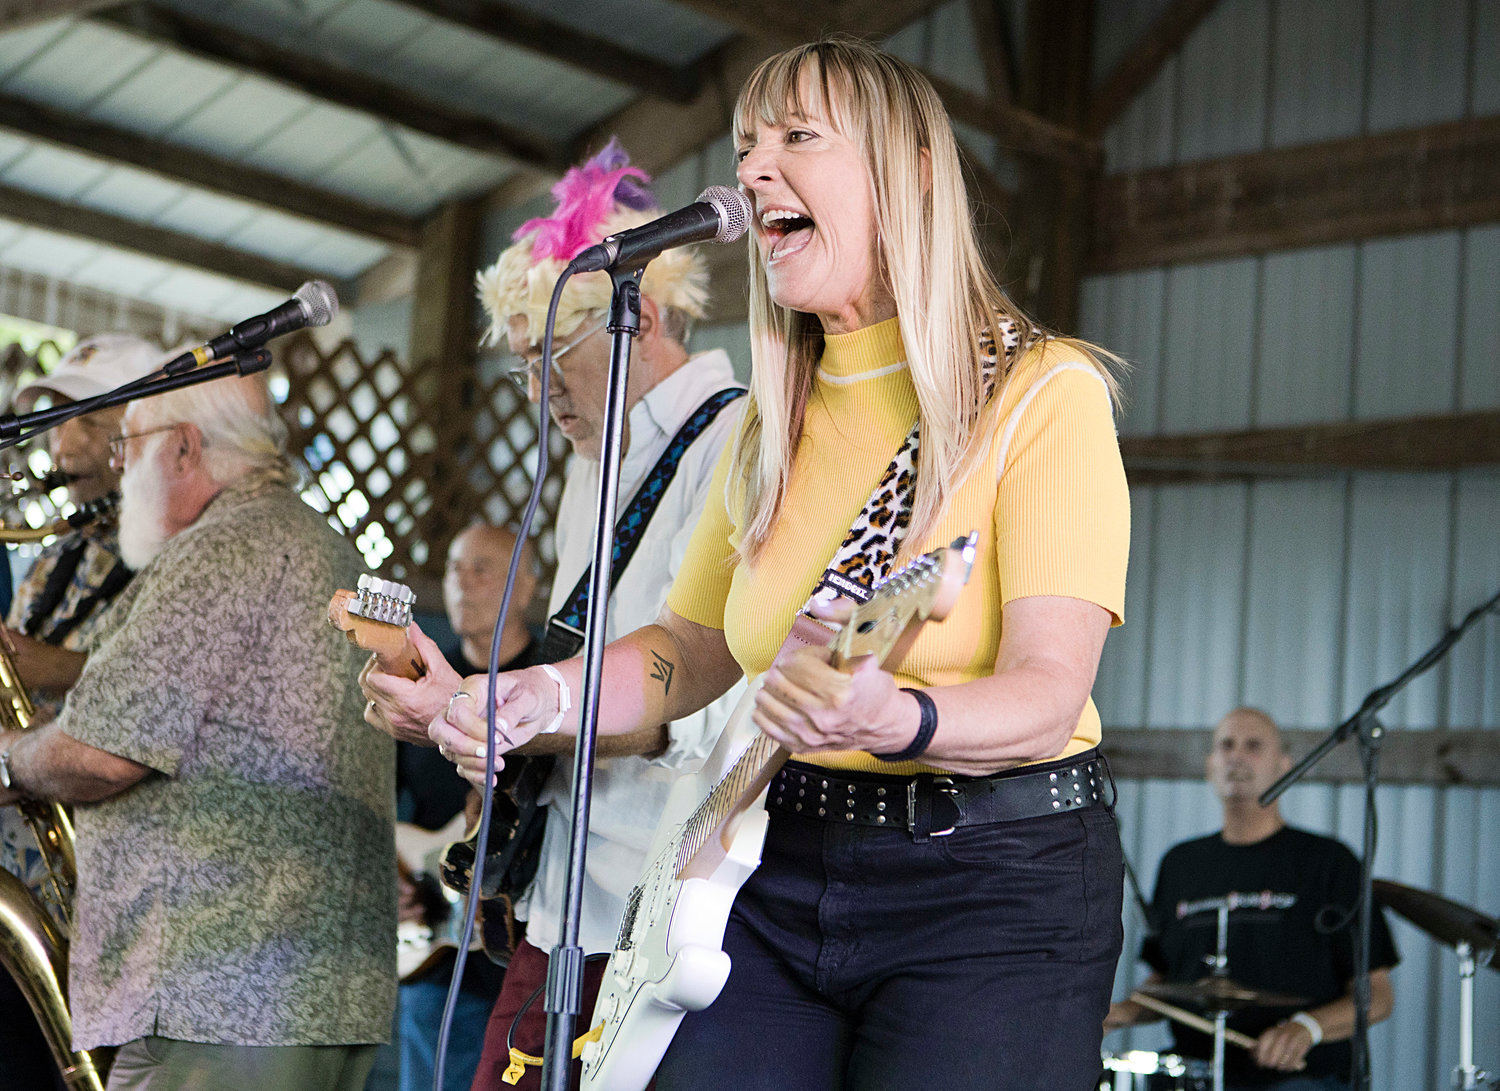 Linda Viens belts out a note during Saturday's concert at the Shellstock festival.